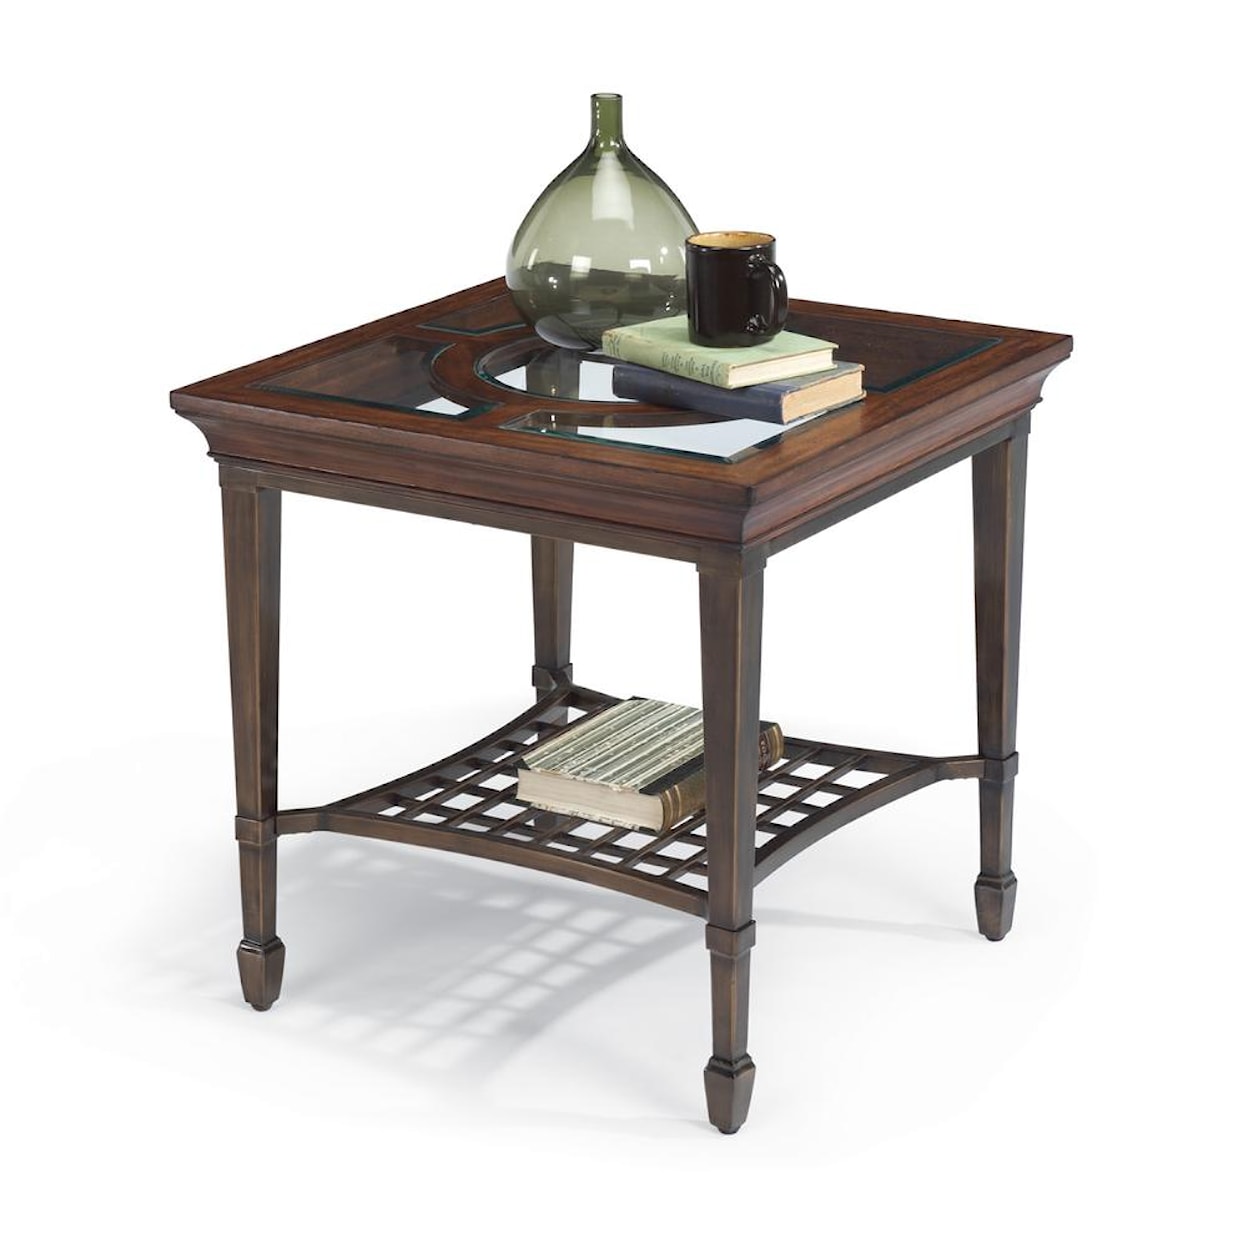 Flexsteel Hathaway Square End Table